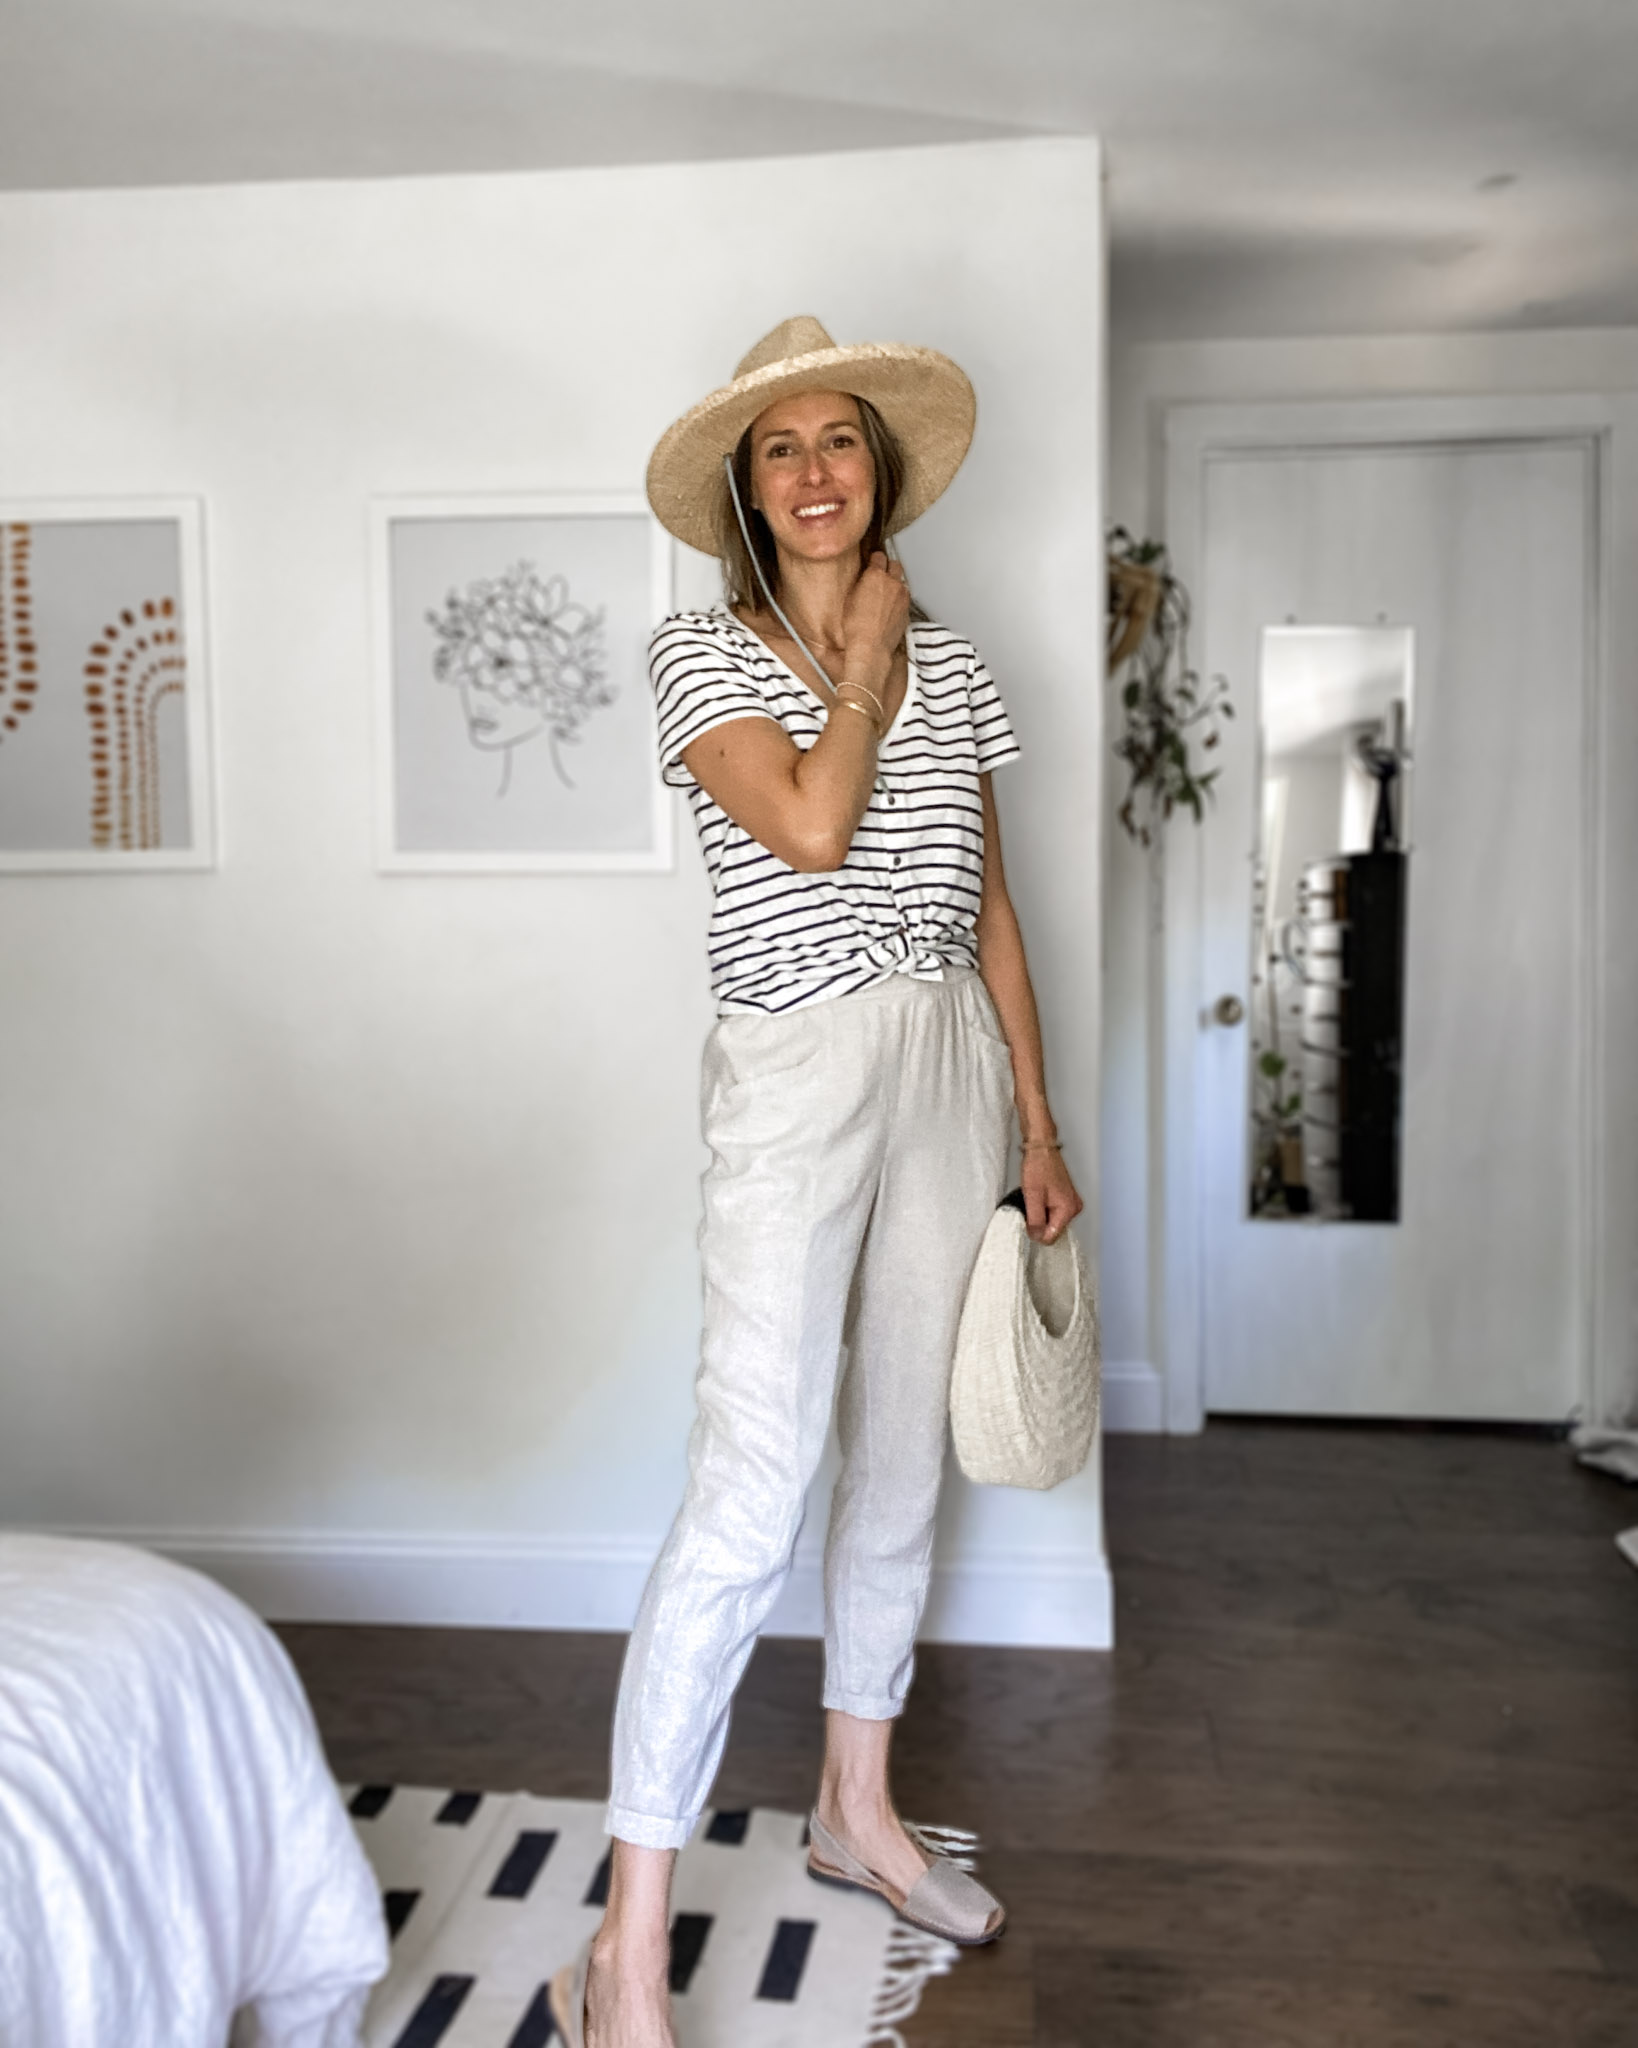 How to Style a Crochet Top: 5 Best Outfit Ideas